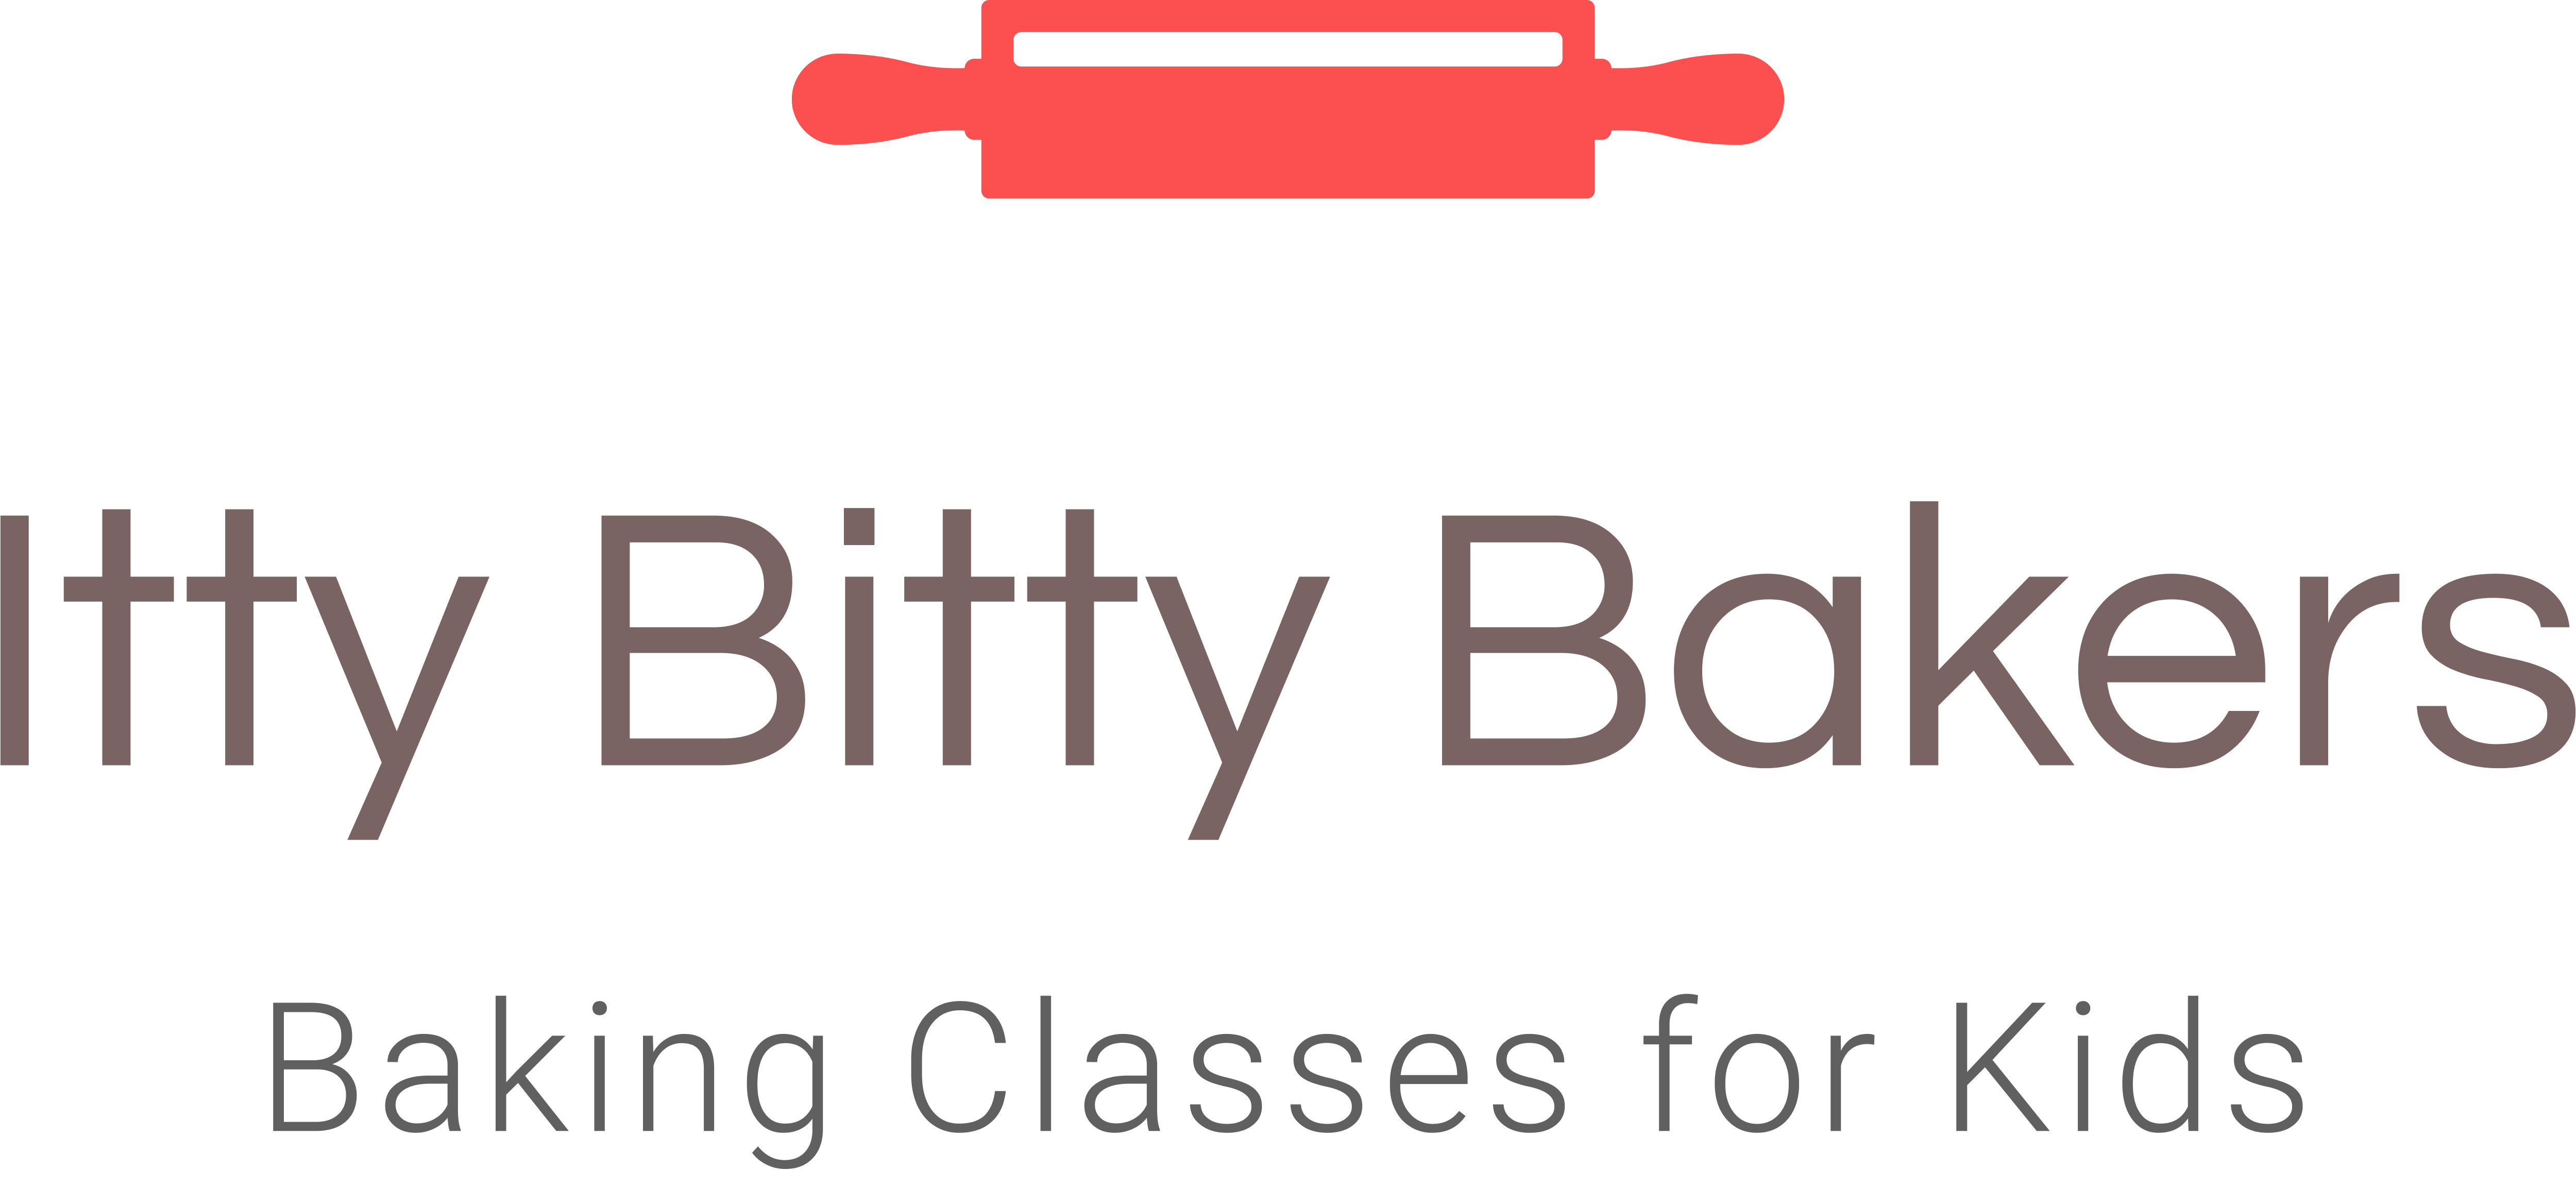 Itty Bitty Bakers Baking Classes for Kids